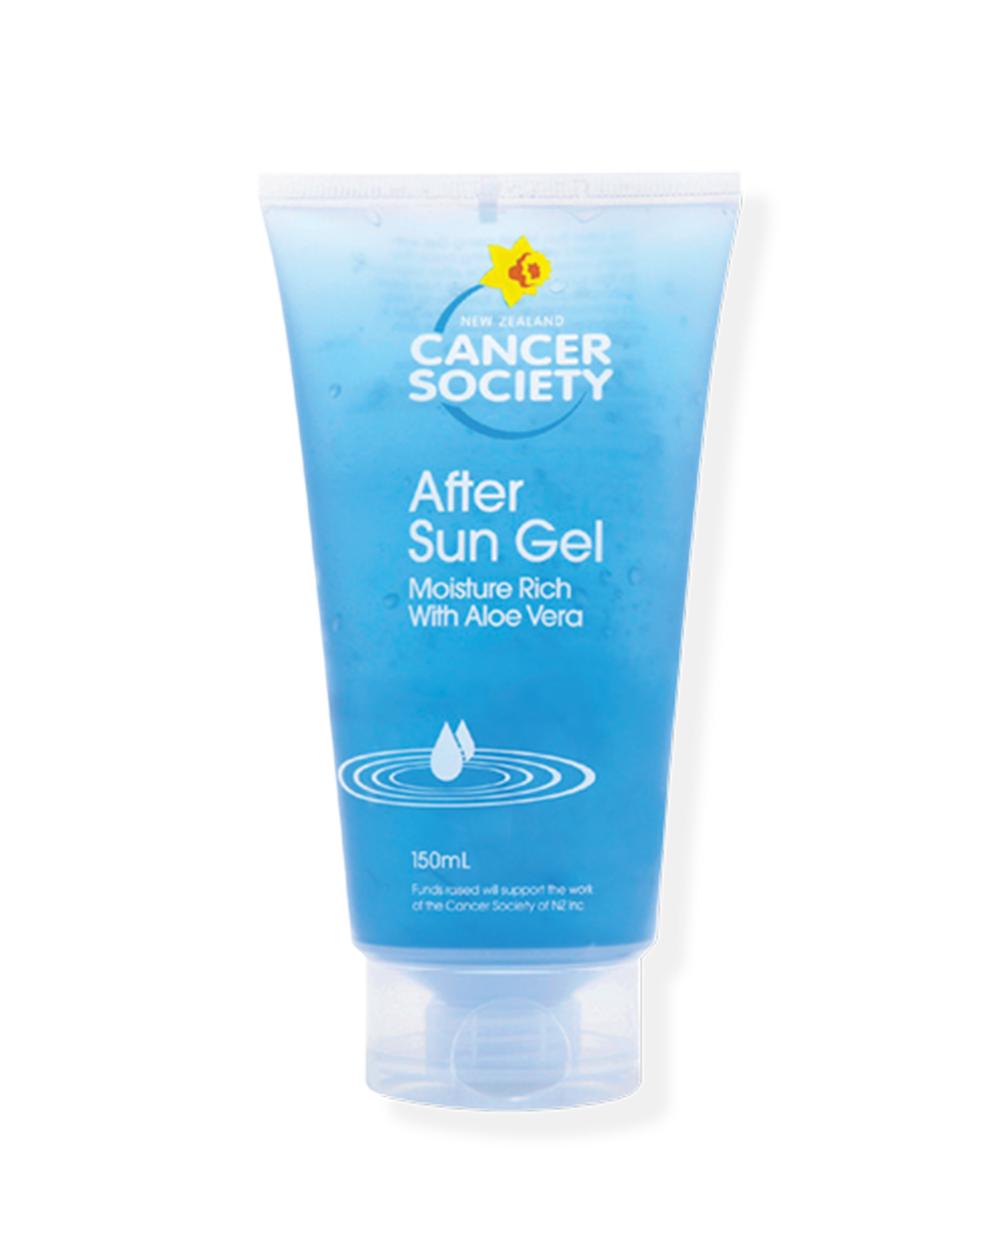 After Sun Gel, $15 from New Zealand Cancer Society